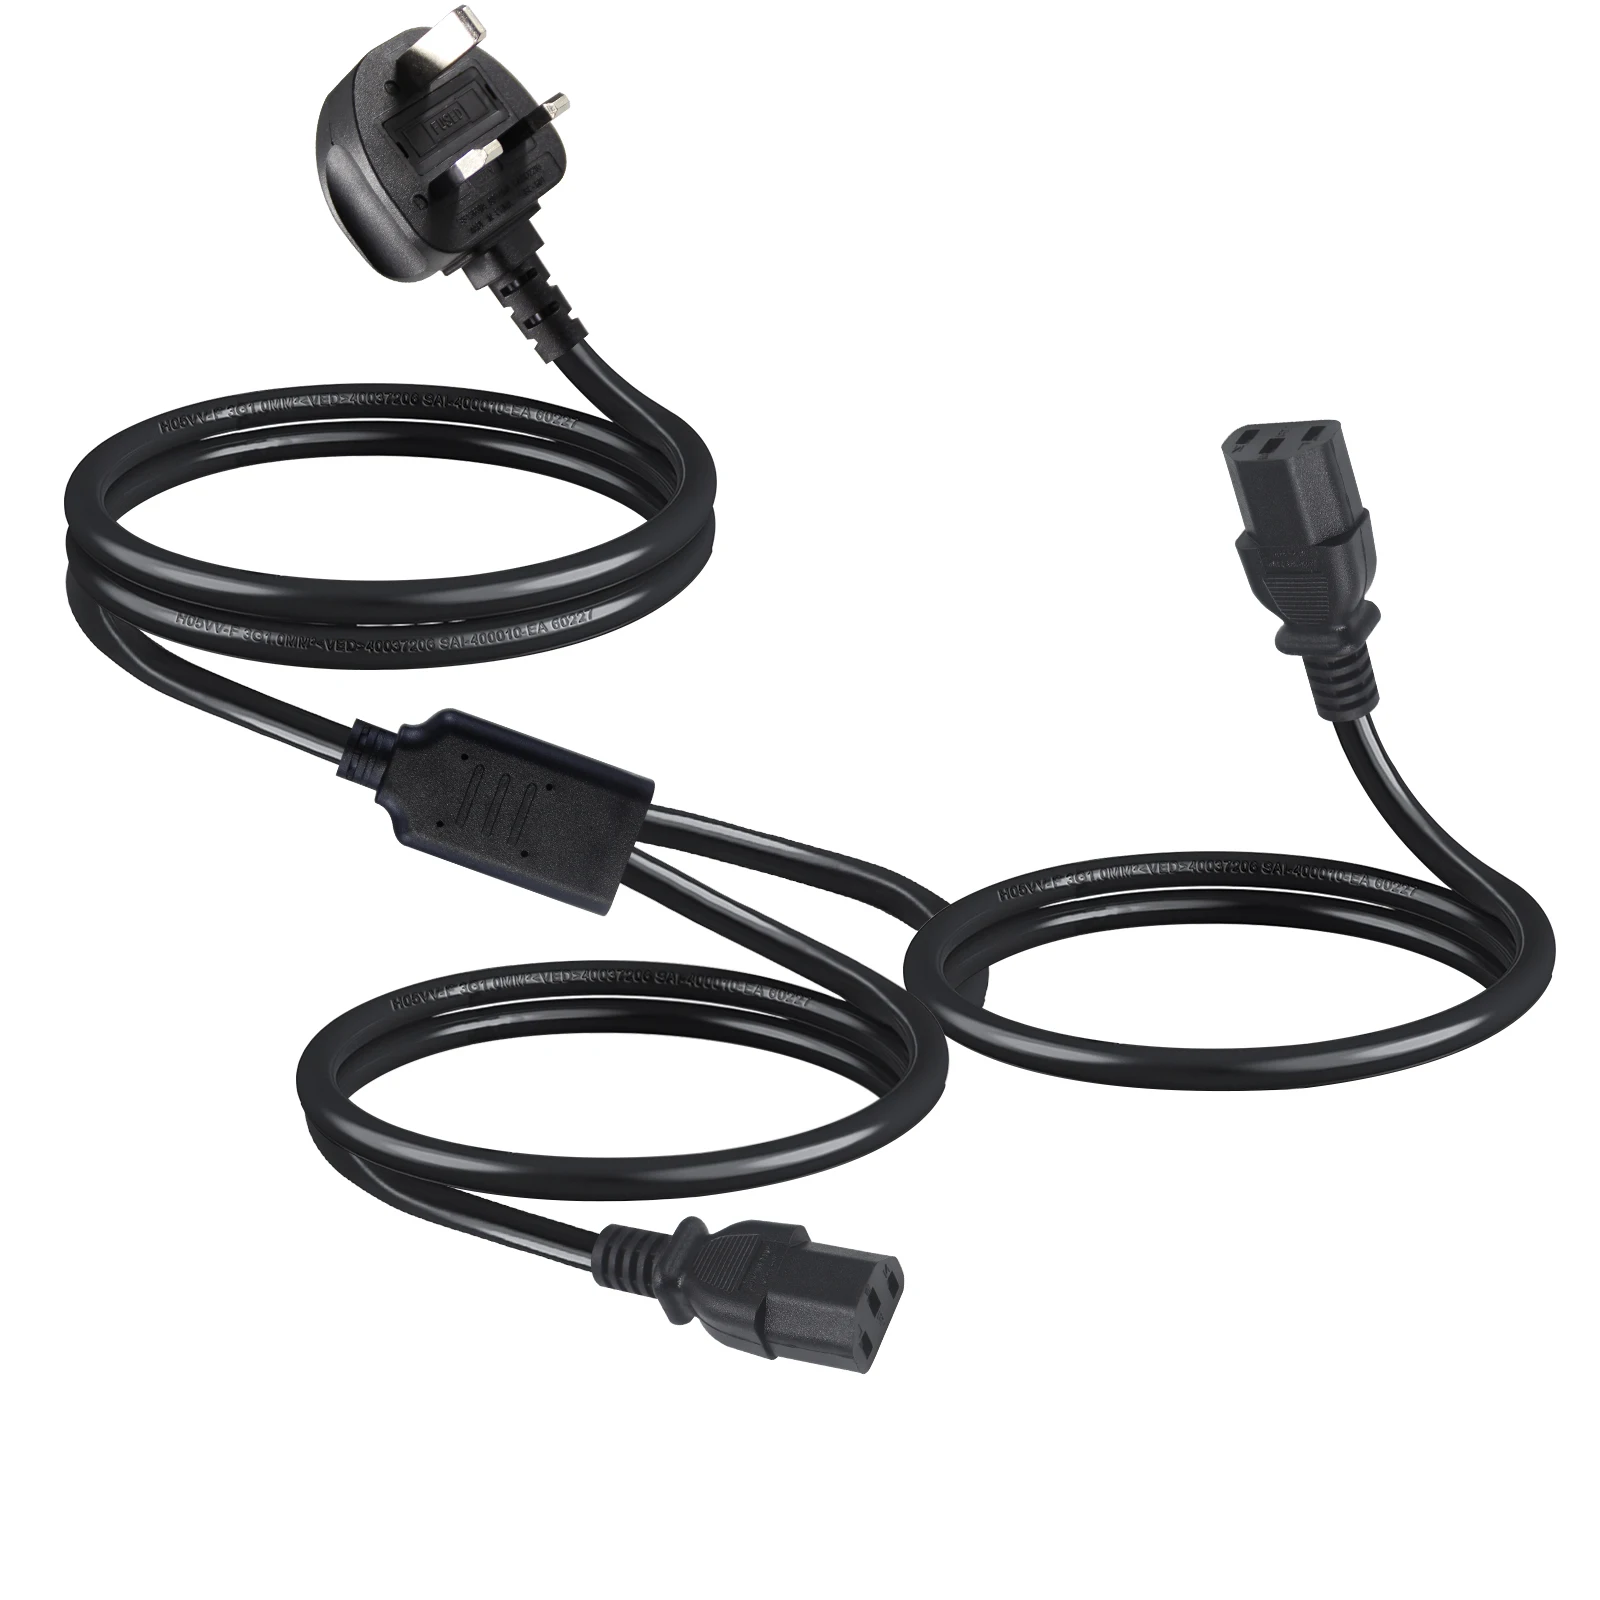 Ac 3 Prong Uk Power Cord With Bs Bsi Approval Computer Cable 23